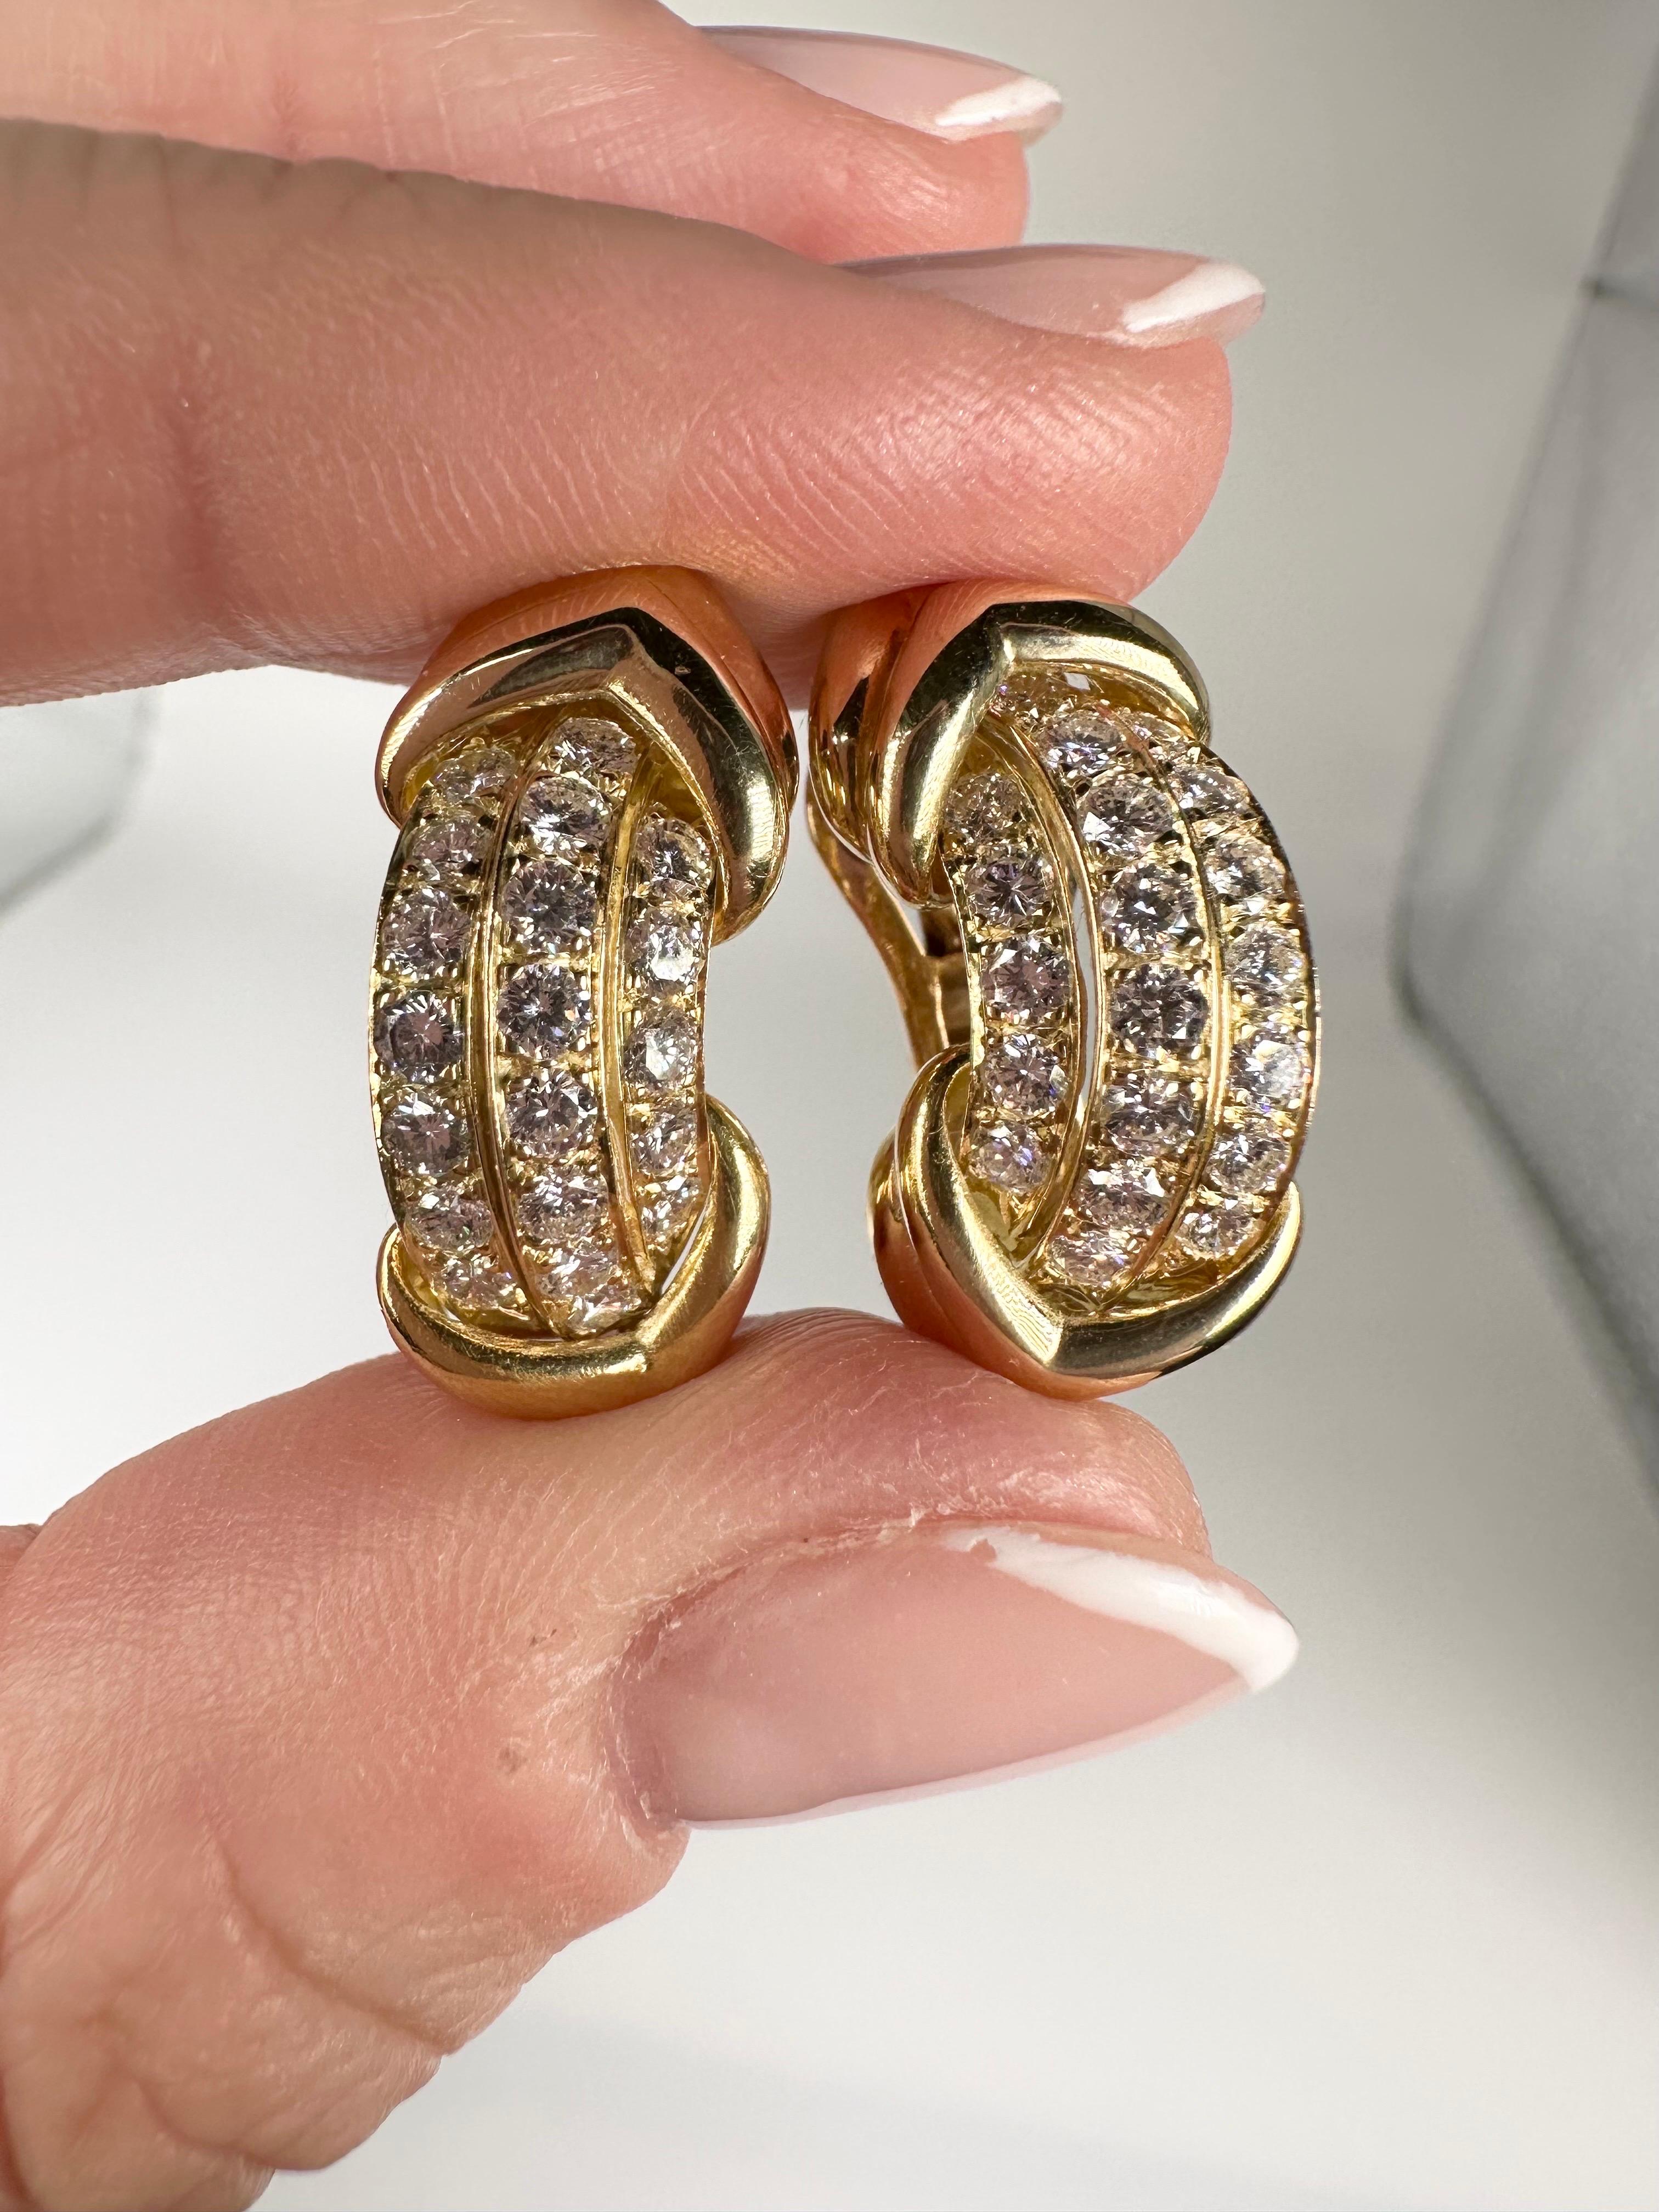 Stunning diamond earrings made with VVS natural diamonds in 18KT yellow gold. The sparkle is unreal on these earrings as the quality speaks for itself!

GOLD: 18KT gold
NATURAL DIAMOND(S)
Clarity/Color: VVS/F
Carat:1.60ct
Cut:Round